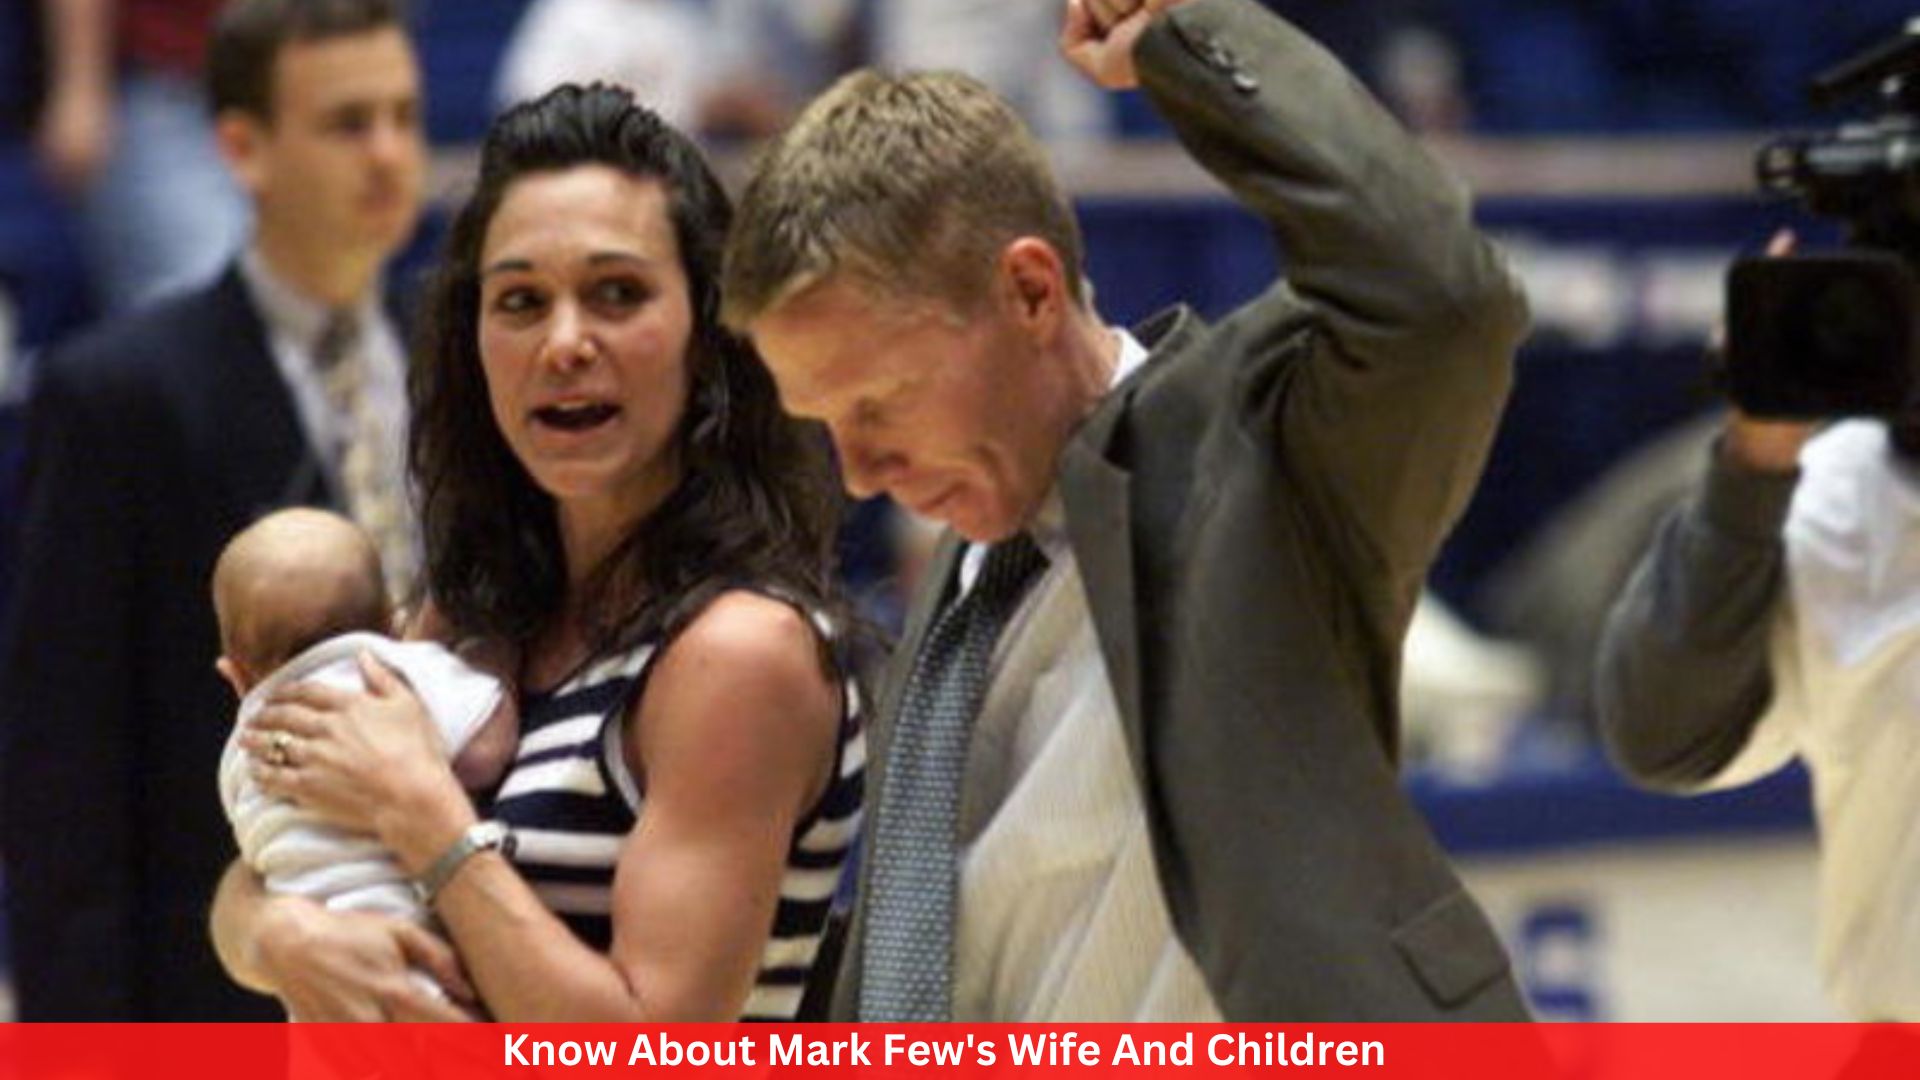 Know About Mark Few's Wife And Children